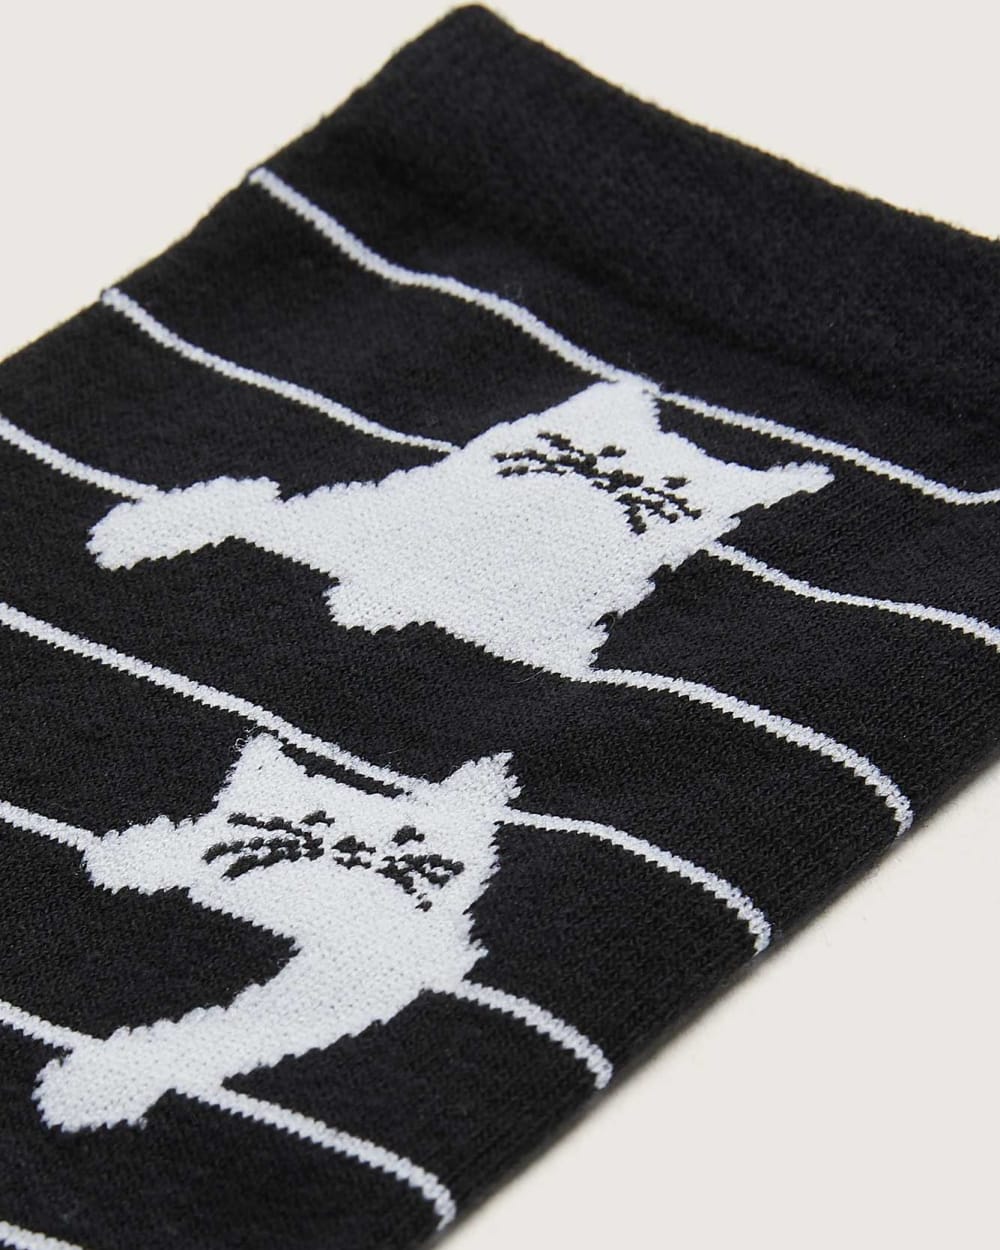 Crew Socks, Stripes with Cat Print - In Every Story | Penningtons